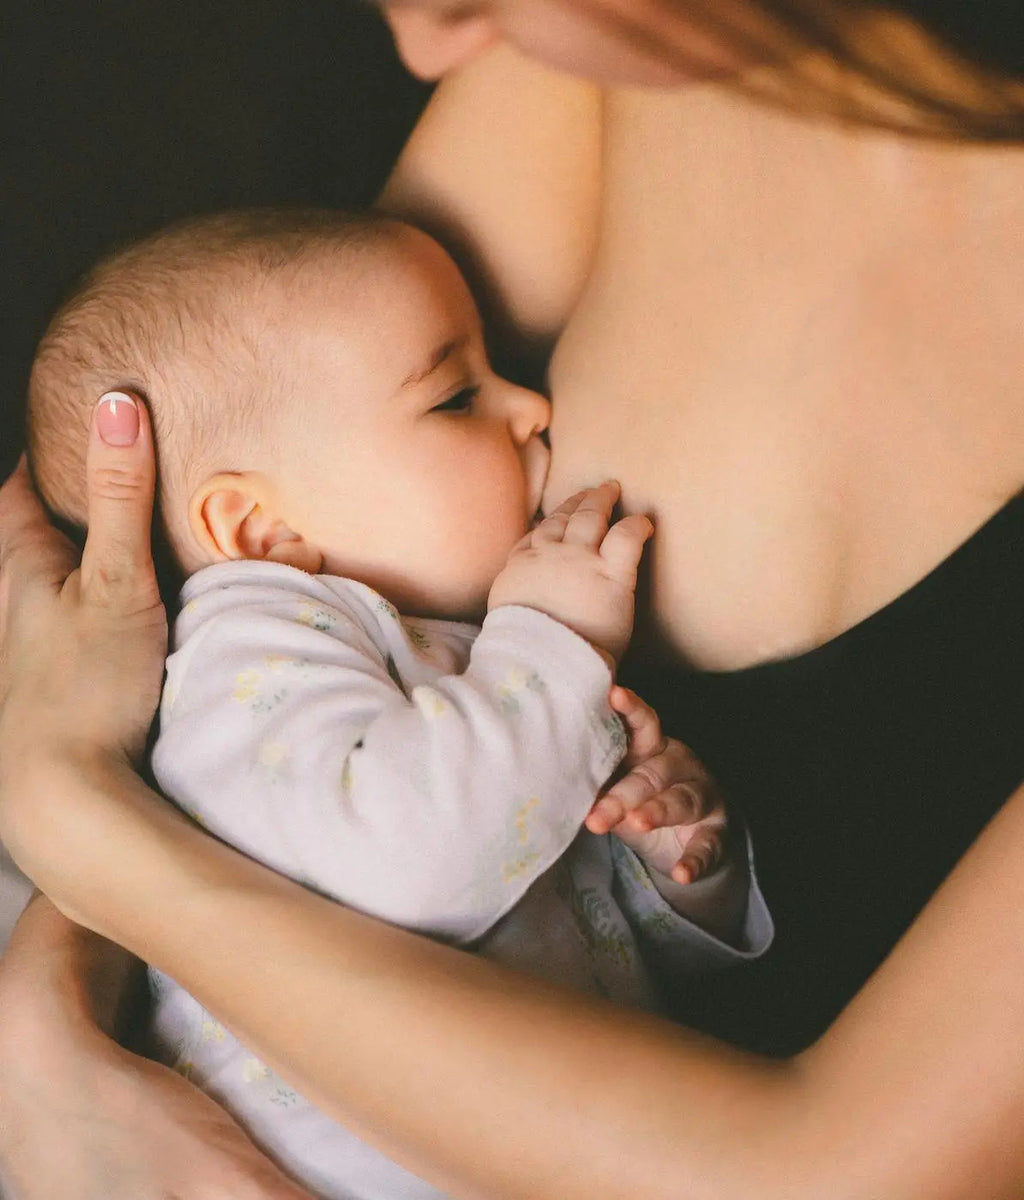 Breastfeeding Must Haves for Your #MomLife Journey